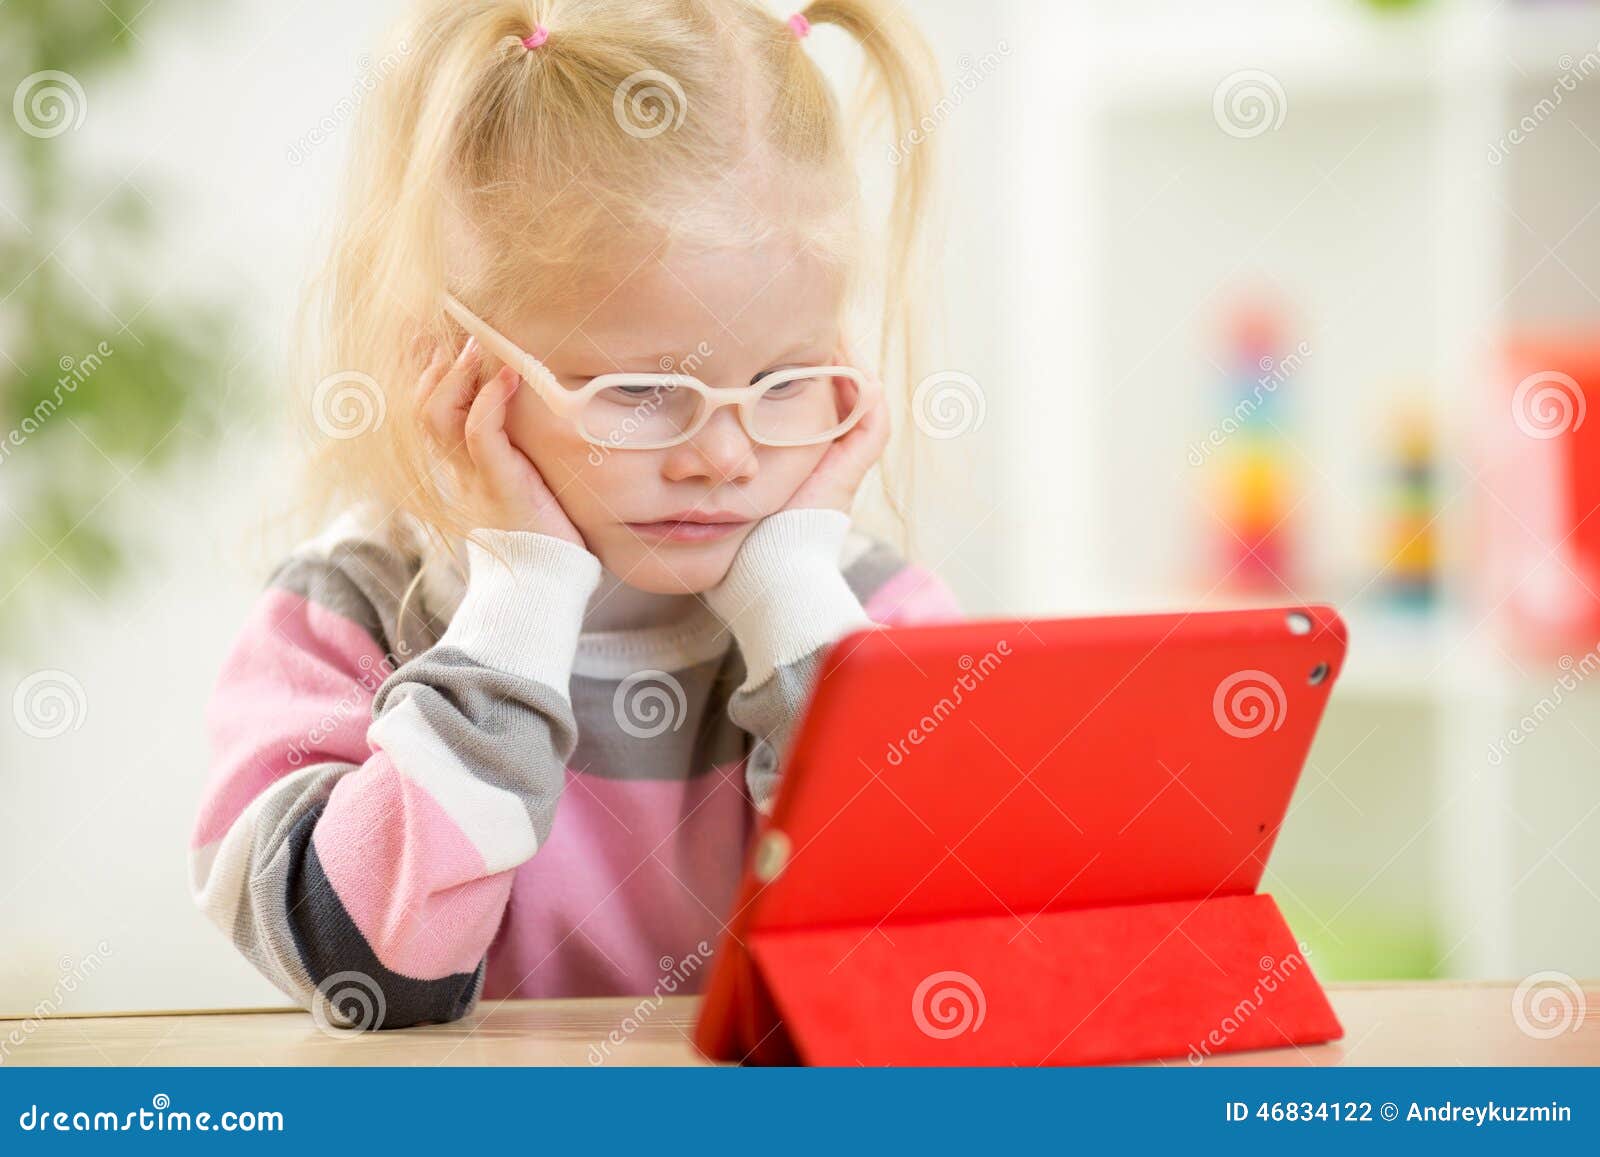 happy child in glasses looking at mini tablet pc